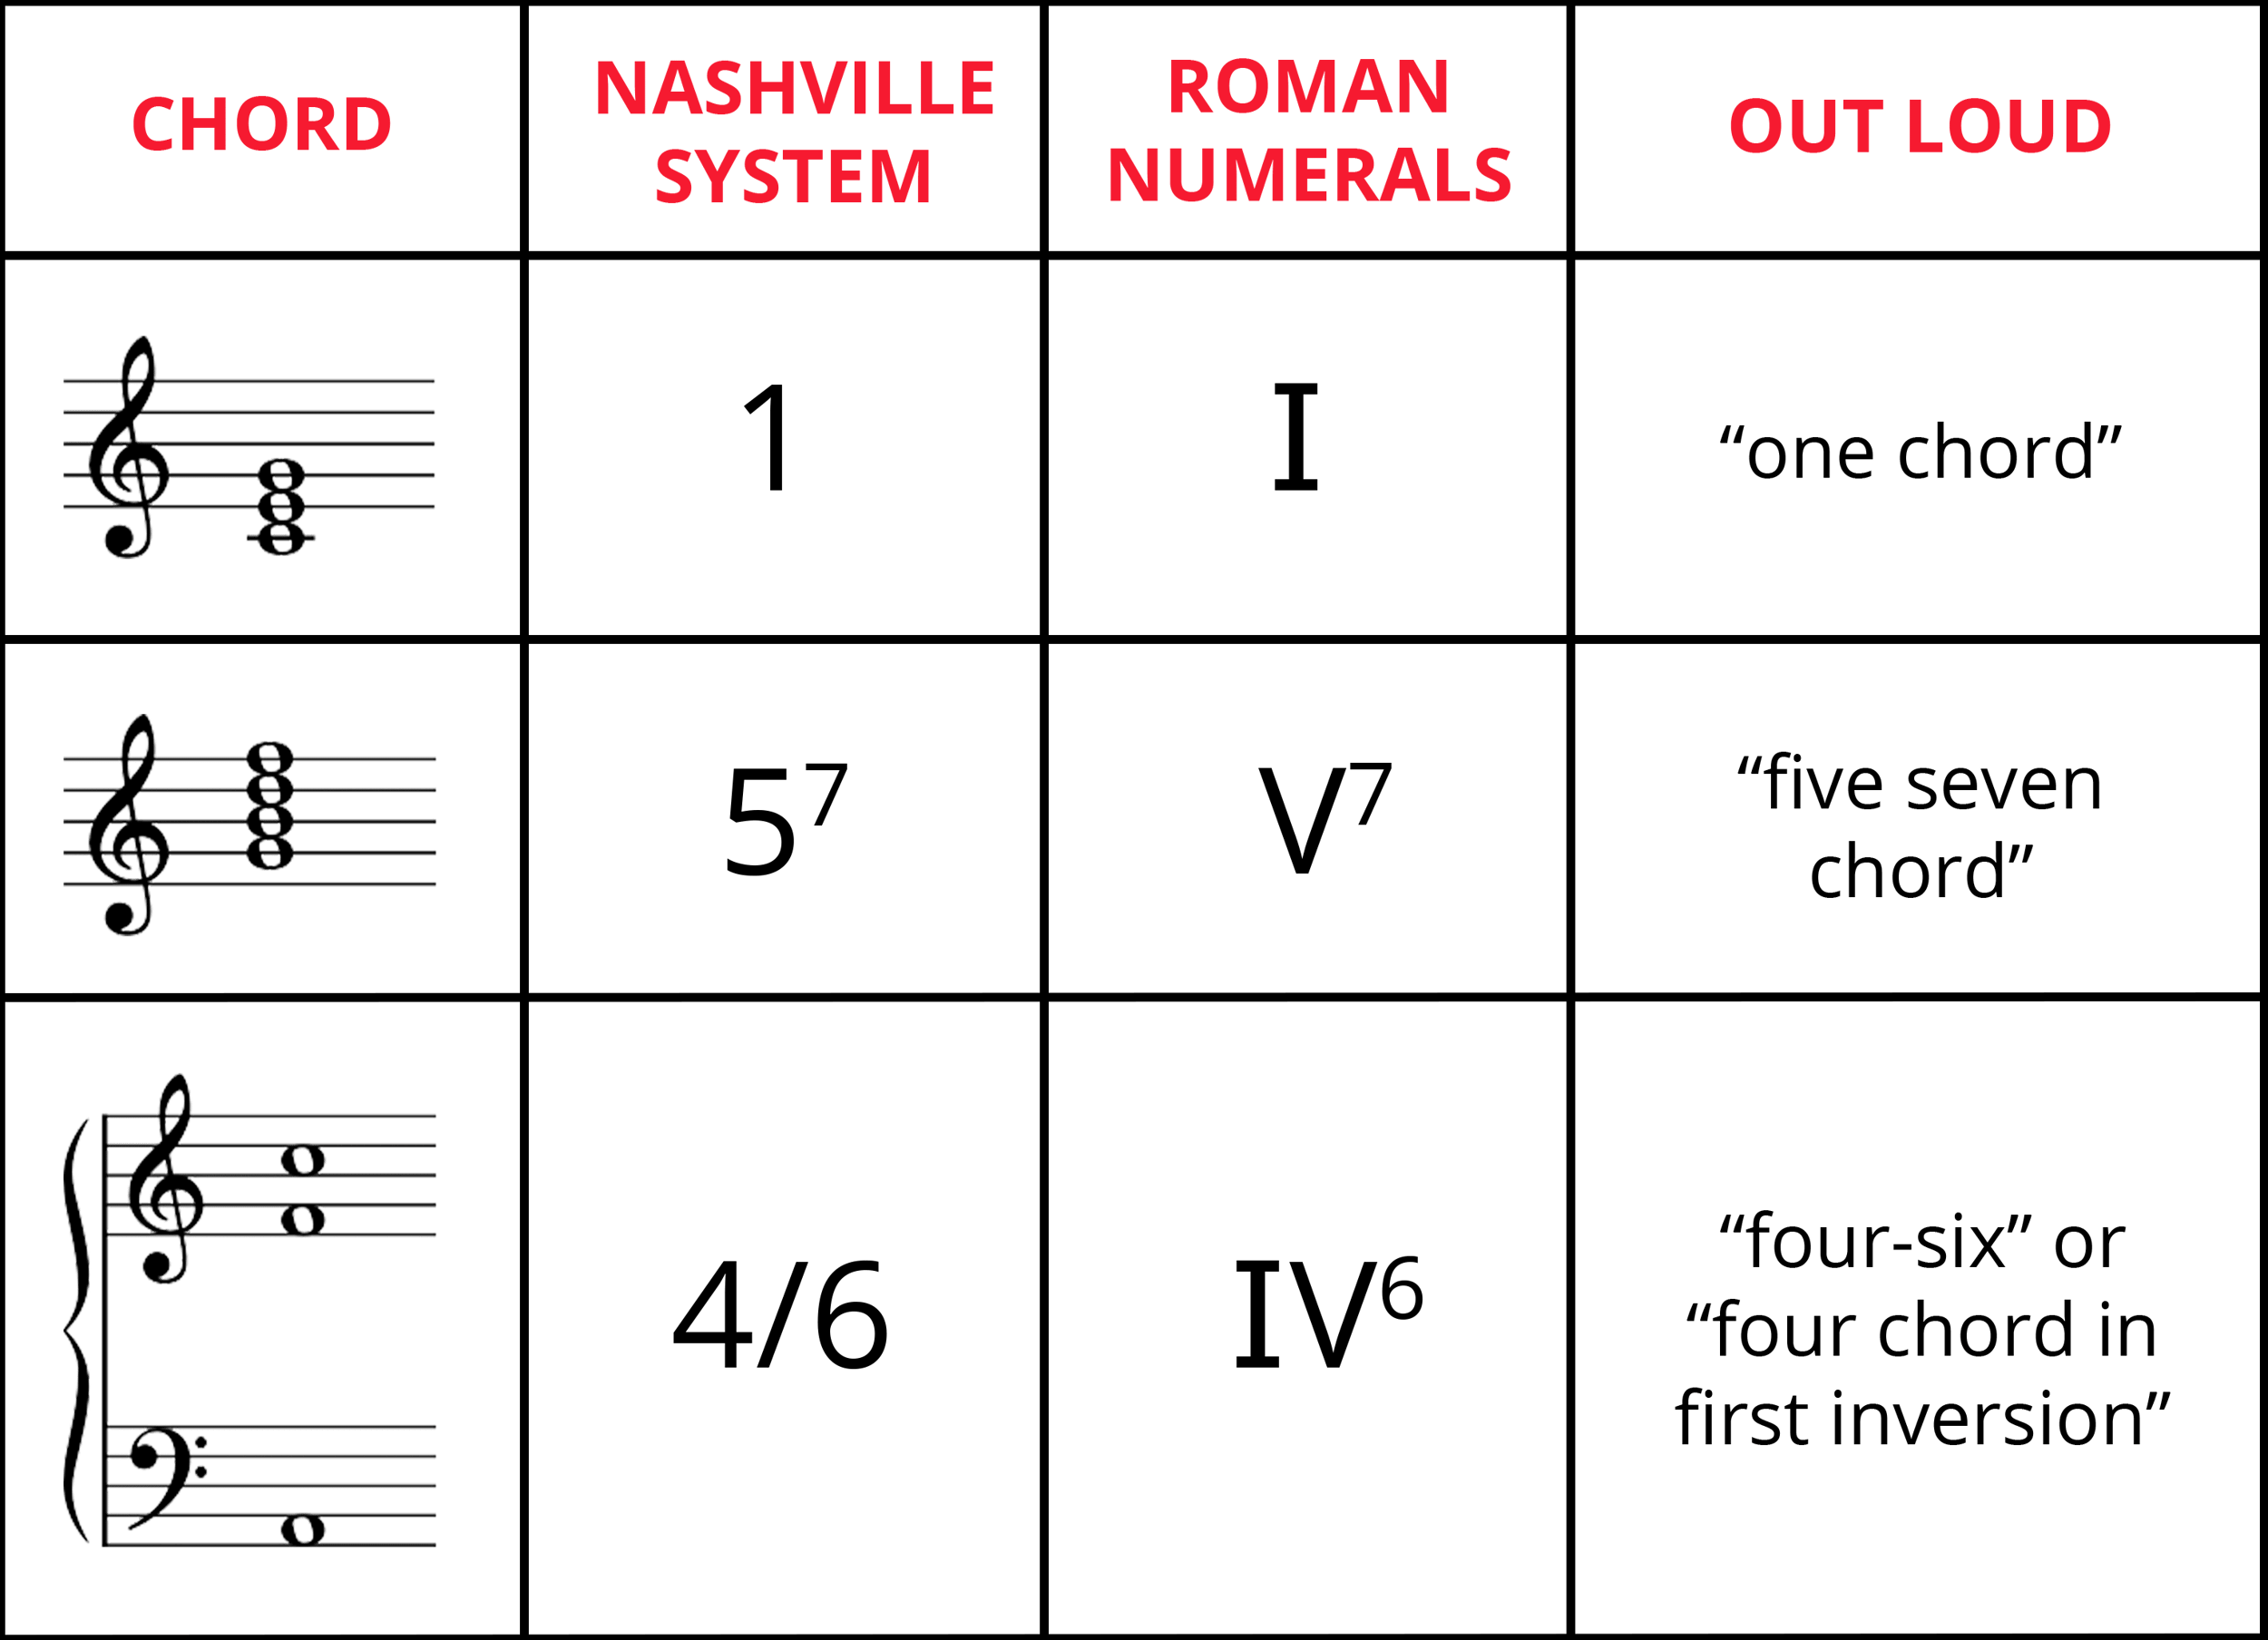 Table summarizing what a chord looks like on standard notation, its notation in Nashville system, its notation in Roman numerals, and how it's read out loud. Row 1: 1 chord, I chord, "one chord." Row 2: 5-7 chord, V-7 chord, "five seven chord." Row 3: 4/6 chord, IV-6 chord, "four six" or "four chord in first inversion."